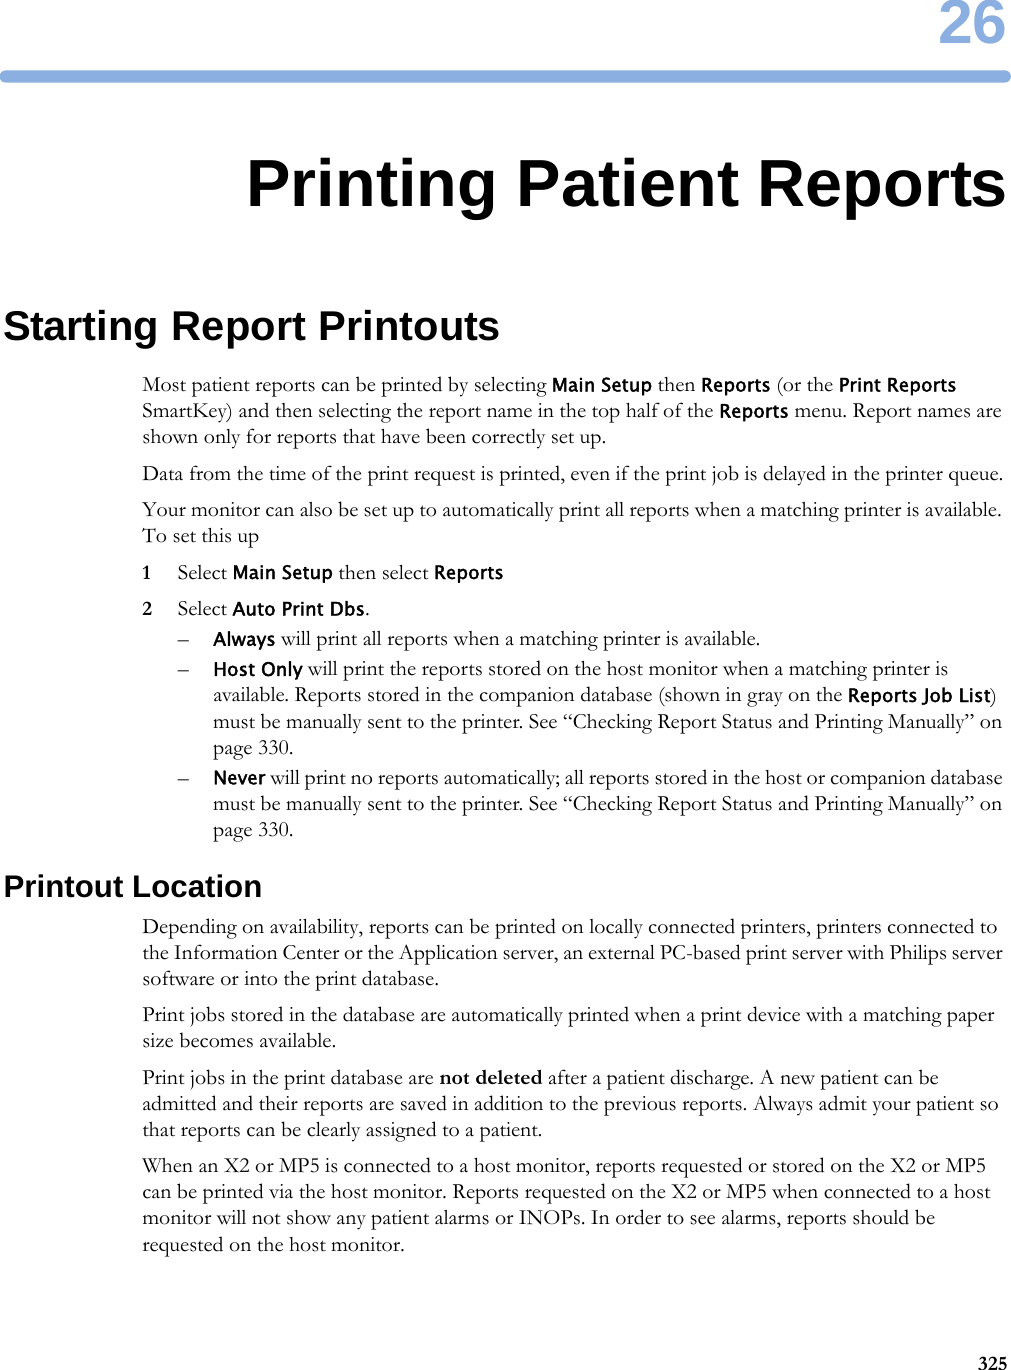 2632526Printing Patient ReportsStarting Report PrintoutsMost patient reports can be printed by selecting Main Setup then Reports (or the Print Reports SmartKey) and then selecting the report name in the top half of the Reports menu. Report names are shown only for reports that have been correctly set up.Data from the time of the print request is printed, even if the print job is delayed in the printer queue.Your monitor can also be set up to automatically print all reports when a matching printer is available. To set this up1Select Main Setup then select Reports2Select Auto Print Dbs.–Always will print all reports when a matching printer is available.–Host Only will print the reports stored on the host monitor when a matching printer is available. Reports stored in the companion database (shown in gray on the Reports Job List) must be manually sent to the printer. See “Checking Report Status and Printing Manually” on page 330.–Never will print no reports automatically; all reports stored in the host or companion database must be manually sent to the printer. See “Checking Report Status and Printing Manually” on page 330.Printout LocationDepending on availability, reports can be printed on locally connected printers, printers connected to the Information Center or the Application server, an external PC-based print server with Philips server software or into the print database. Print jobs stored in the database are automatically printed when a print device with a matching paper size becomes available.Print jobs in the print database are not deleted after a patient discharge. A new patient can be admitted and their reports are saved in addition to the previous reports. Always admit your patient so that reports can be clearly assigned to a patient.When an X2 or MP5 is connected to a host monitor, reports requested or stored on the X2 or MP5 can be printed via the host monitor. Reports requested on the X2 or MP5 when connected to a host monitor will not show any patient alarms or INOPs. In order to see alarms, reports should be requested on the host monitor.